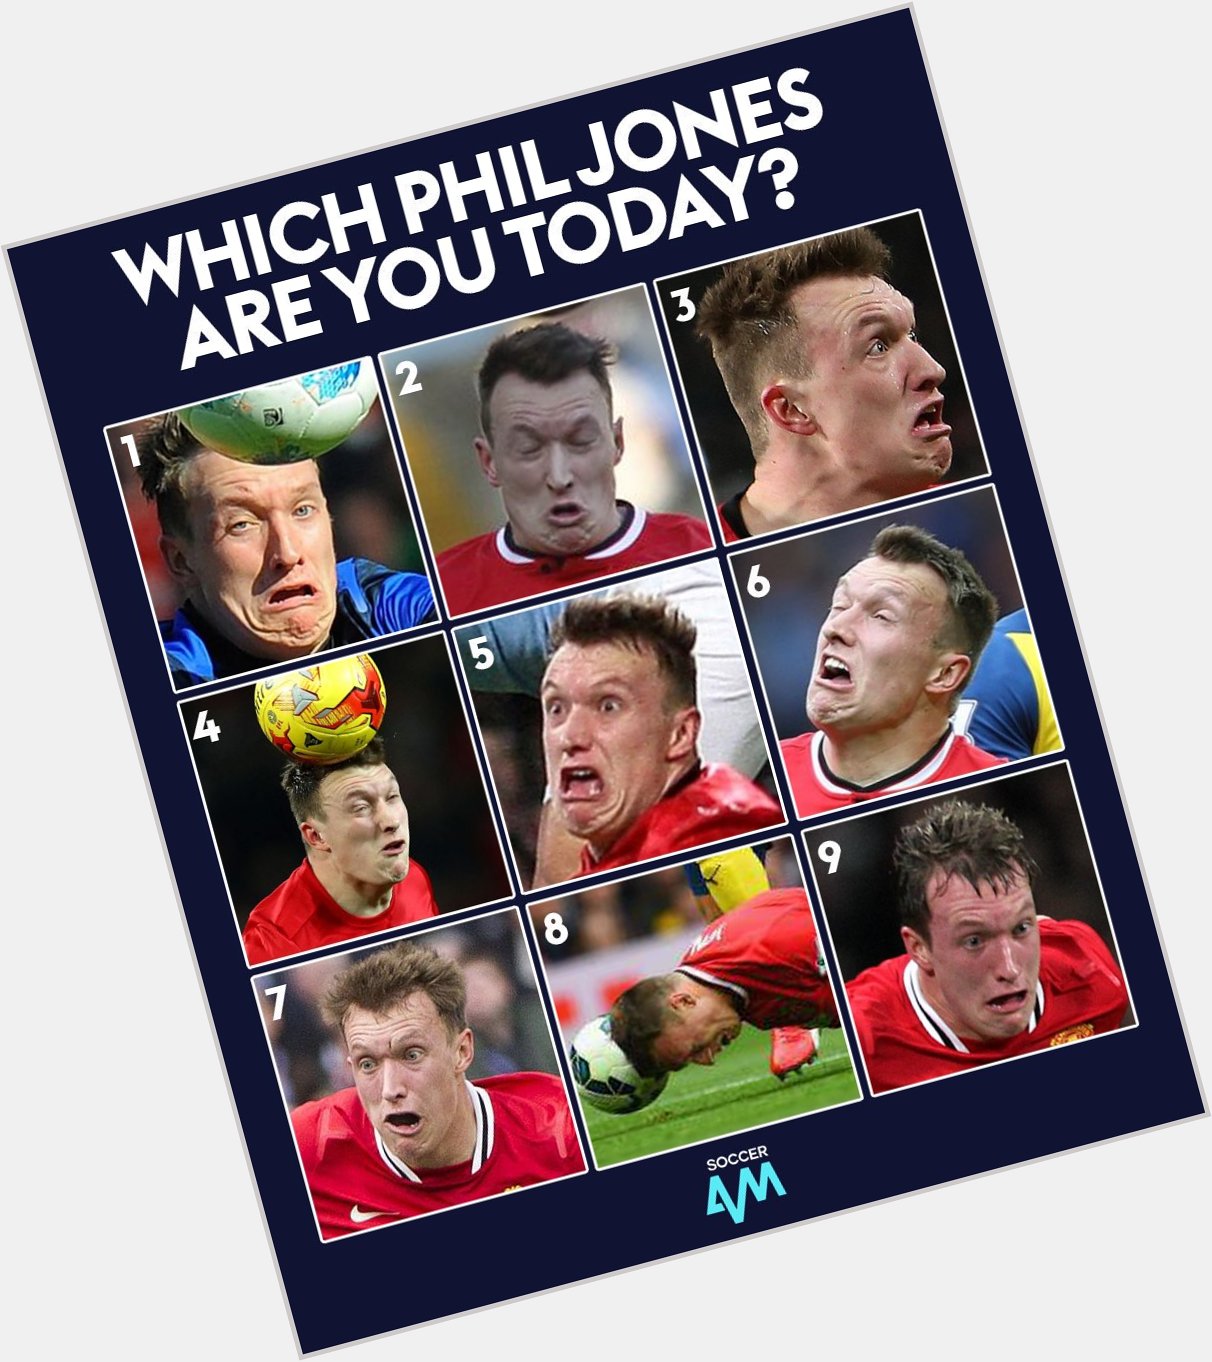 Happy Birthday to the man of many faces... Which Phil Jones are you today? 